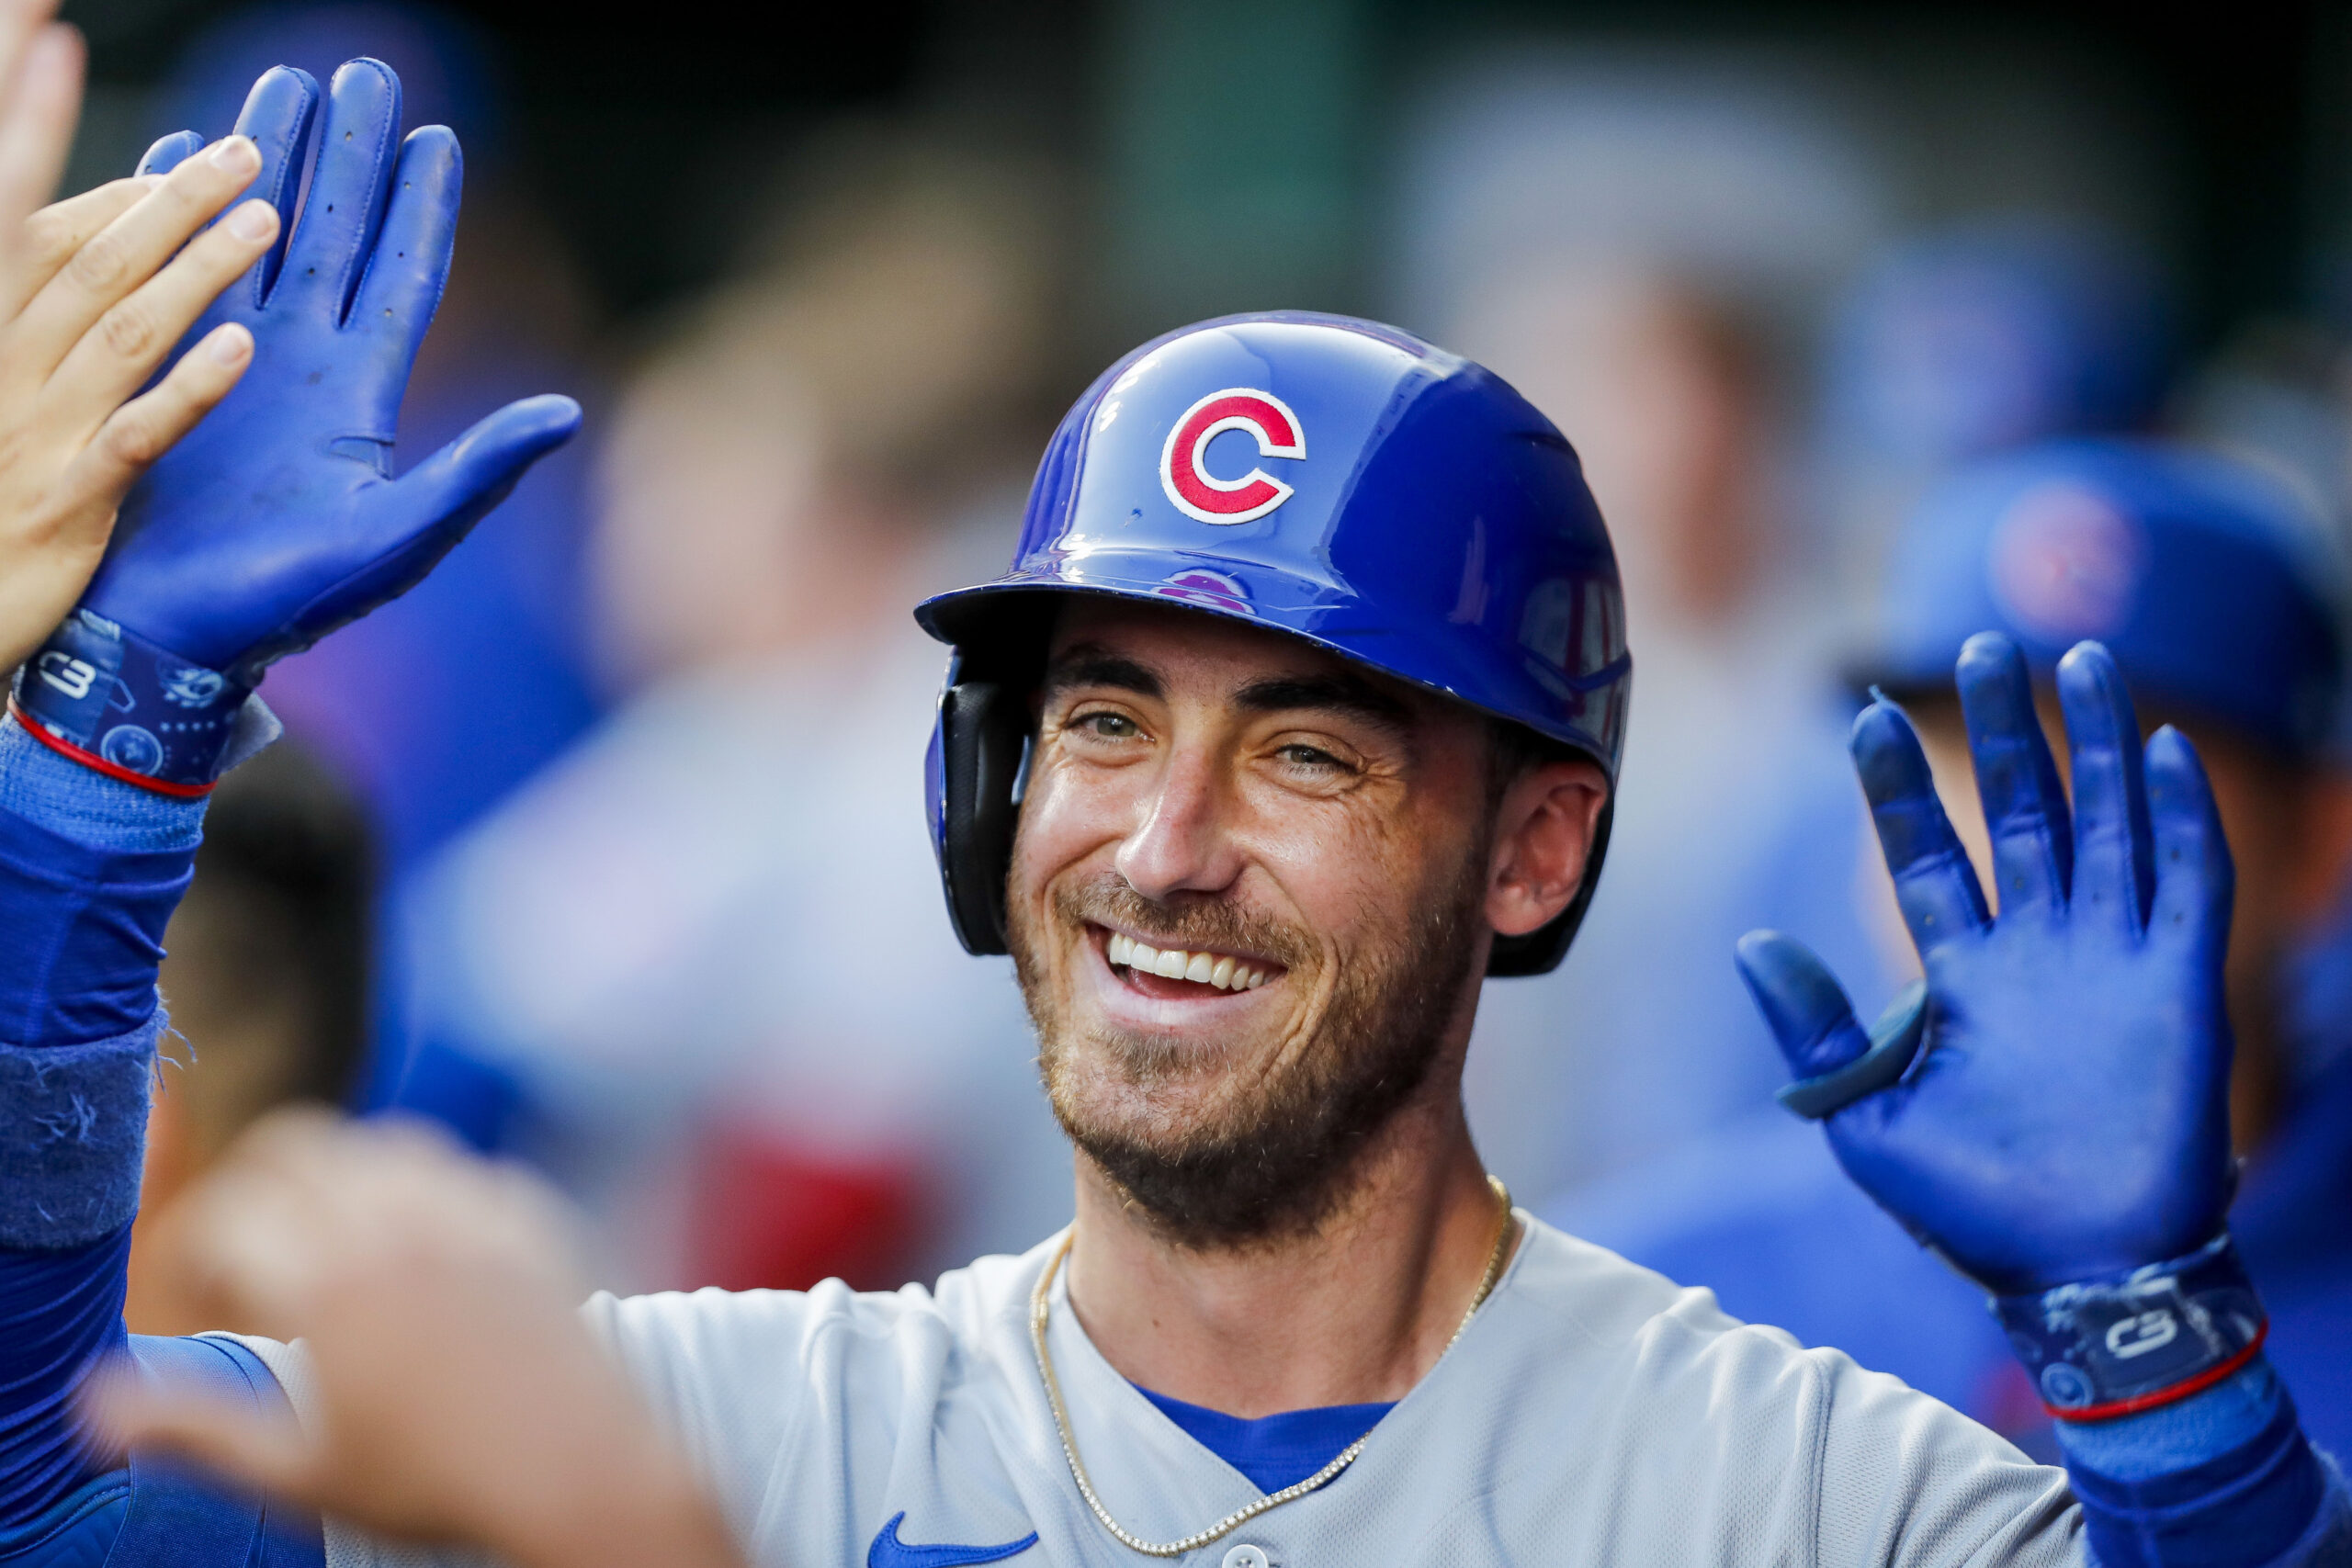 Chicago Cubs first baseman Cody Bellinger (24) high fives teammates after hitting a solo home run in the third inning against the Cincinnati Reds at Great American Ball Park.